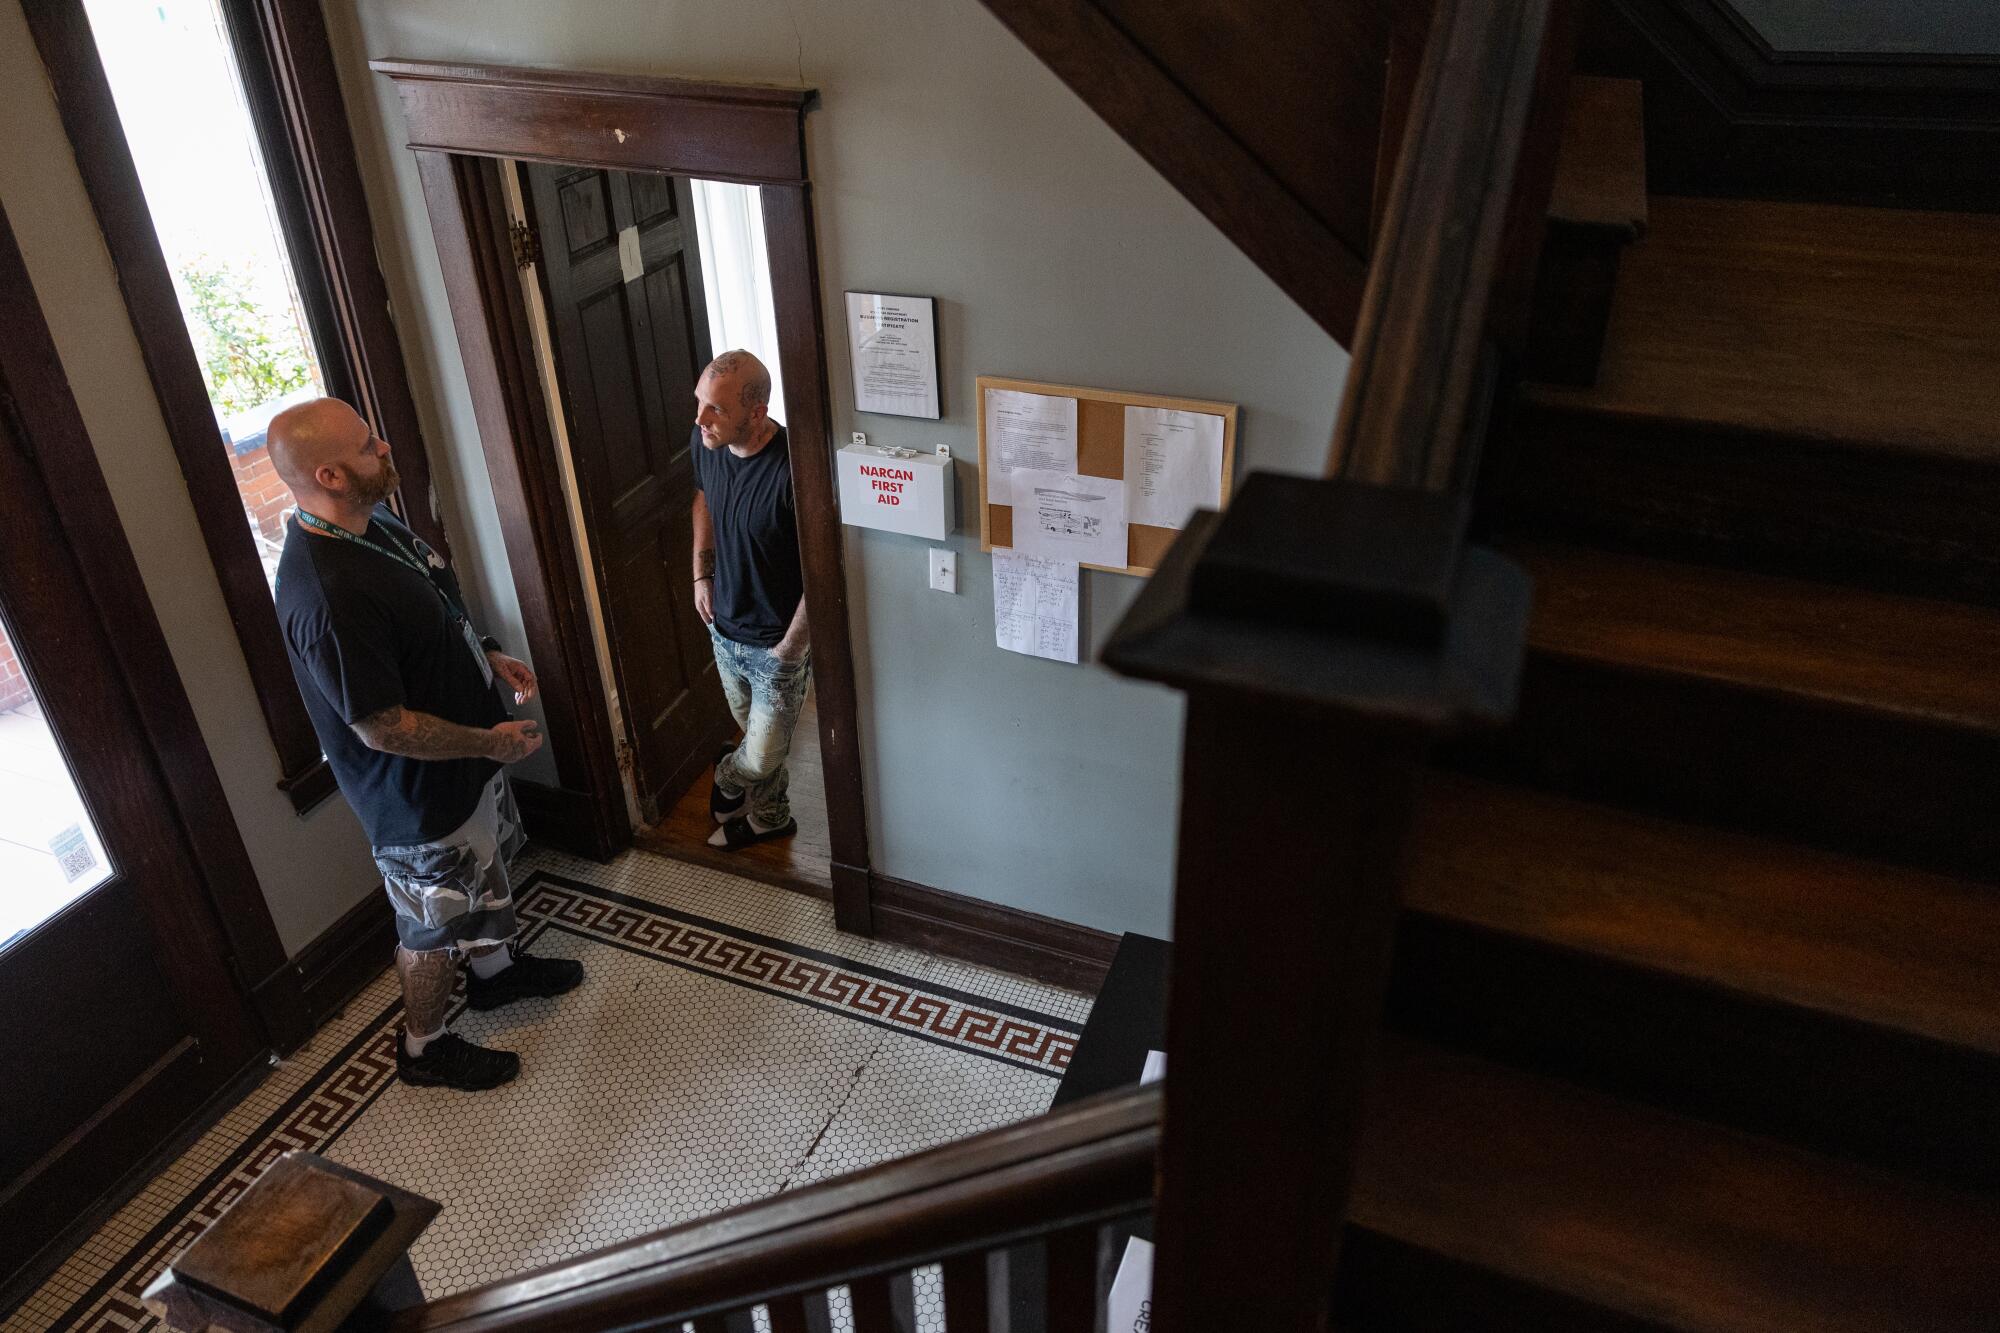 Blake Orner,(right) stands in the doorway of his bedroom as he talks with Fred Von